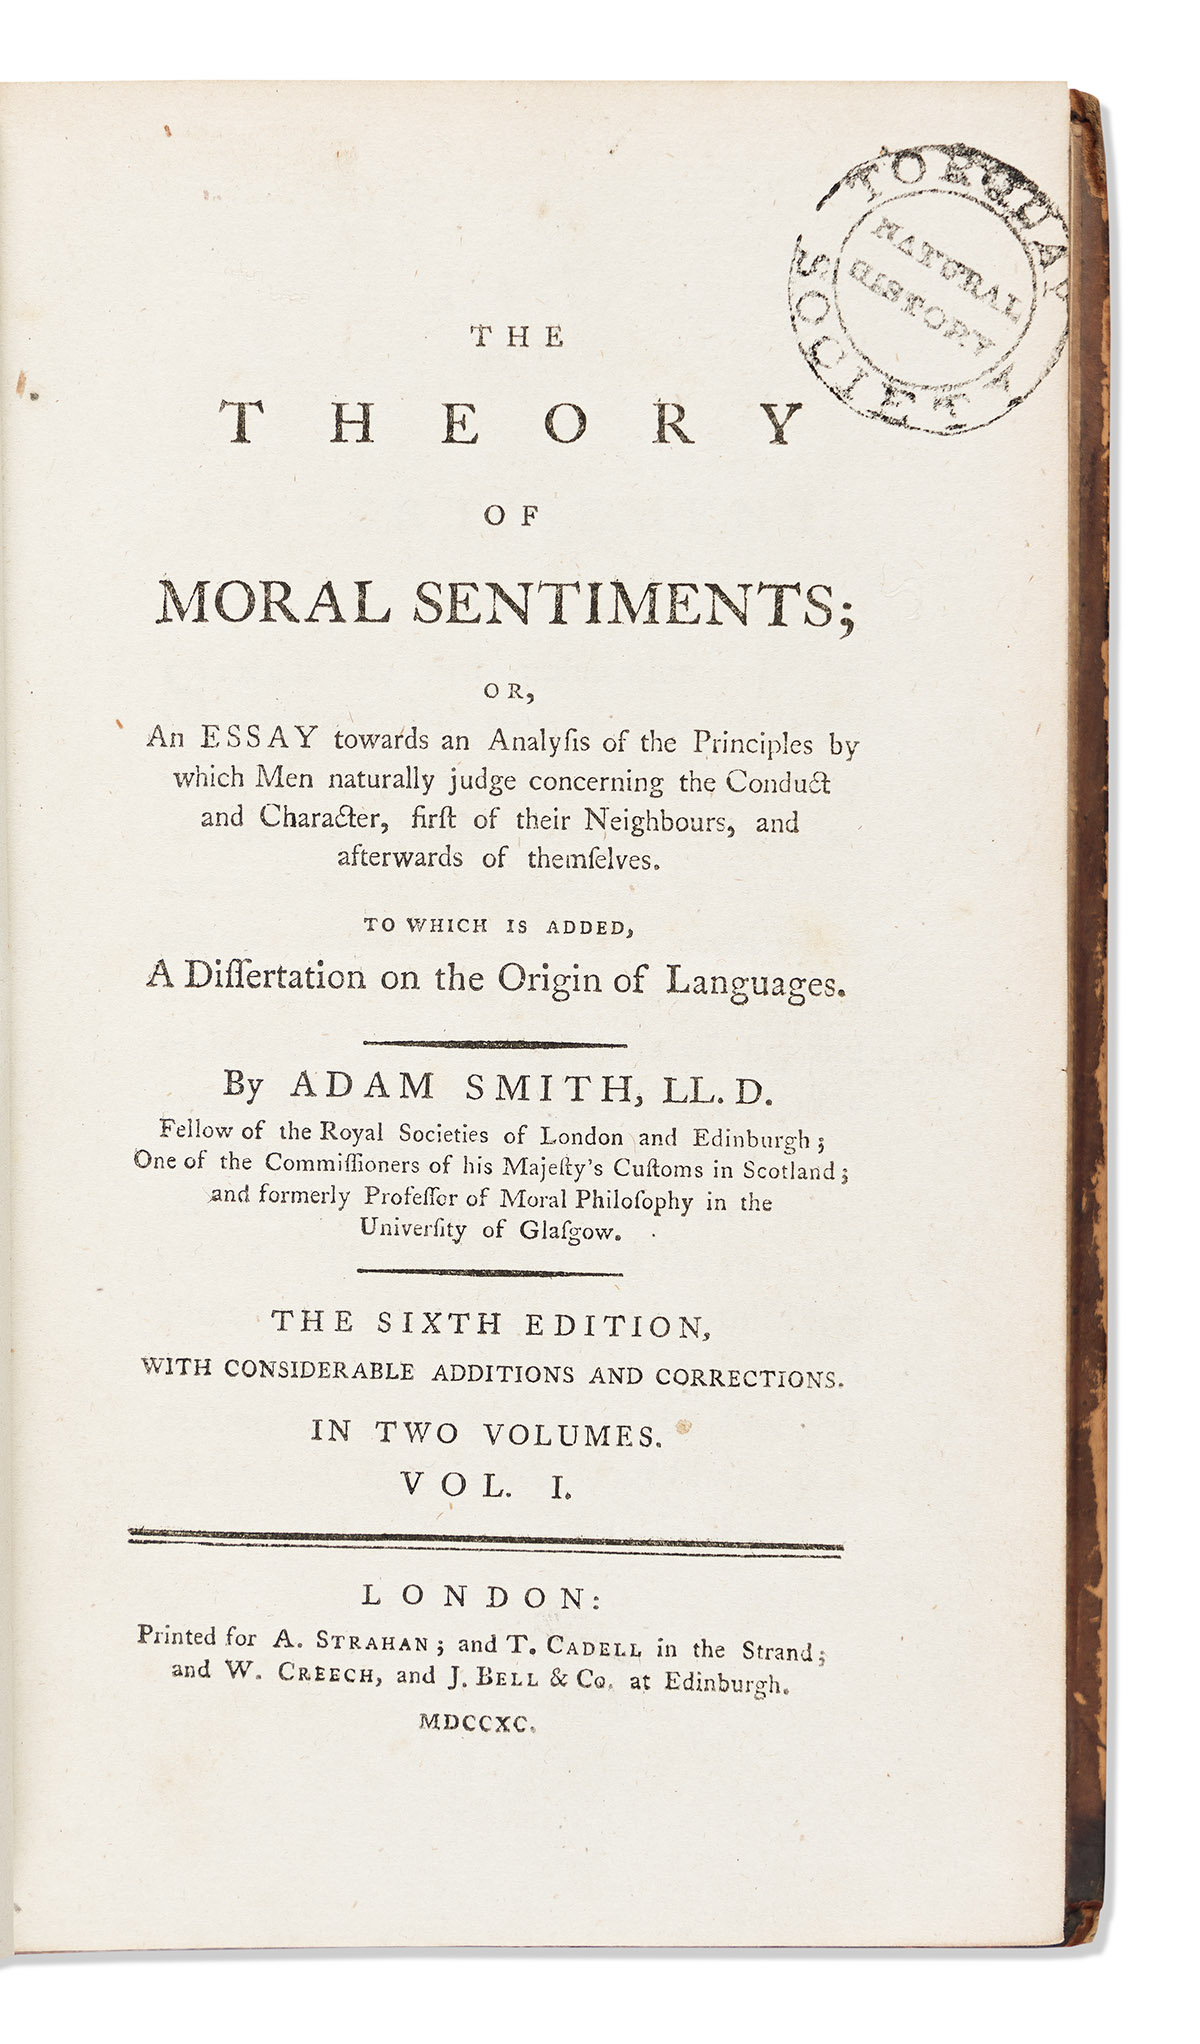 [Economics] Smith, Adam (1723-1790) The Theory of Moral Sentiments.